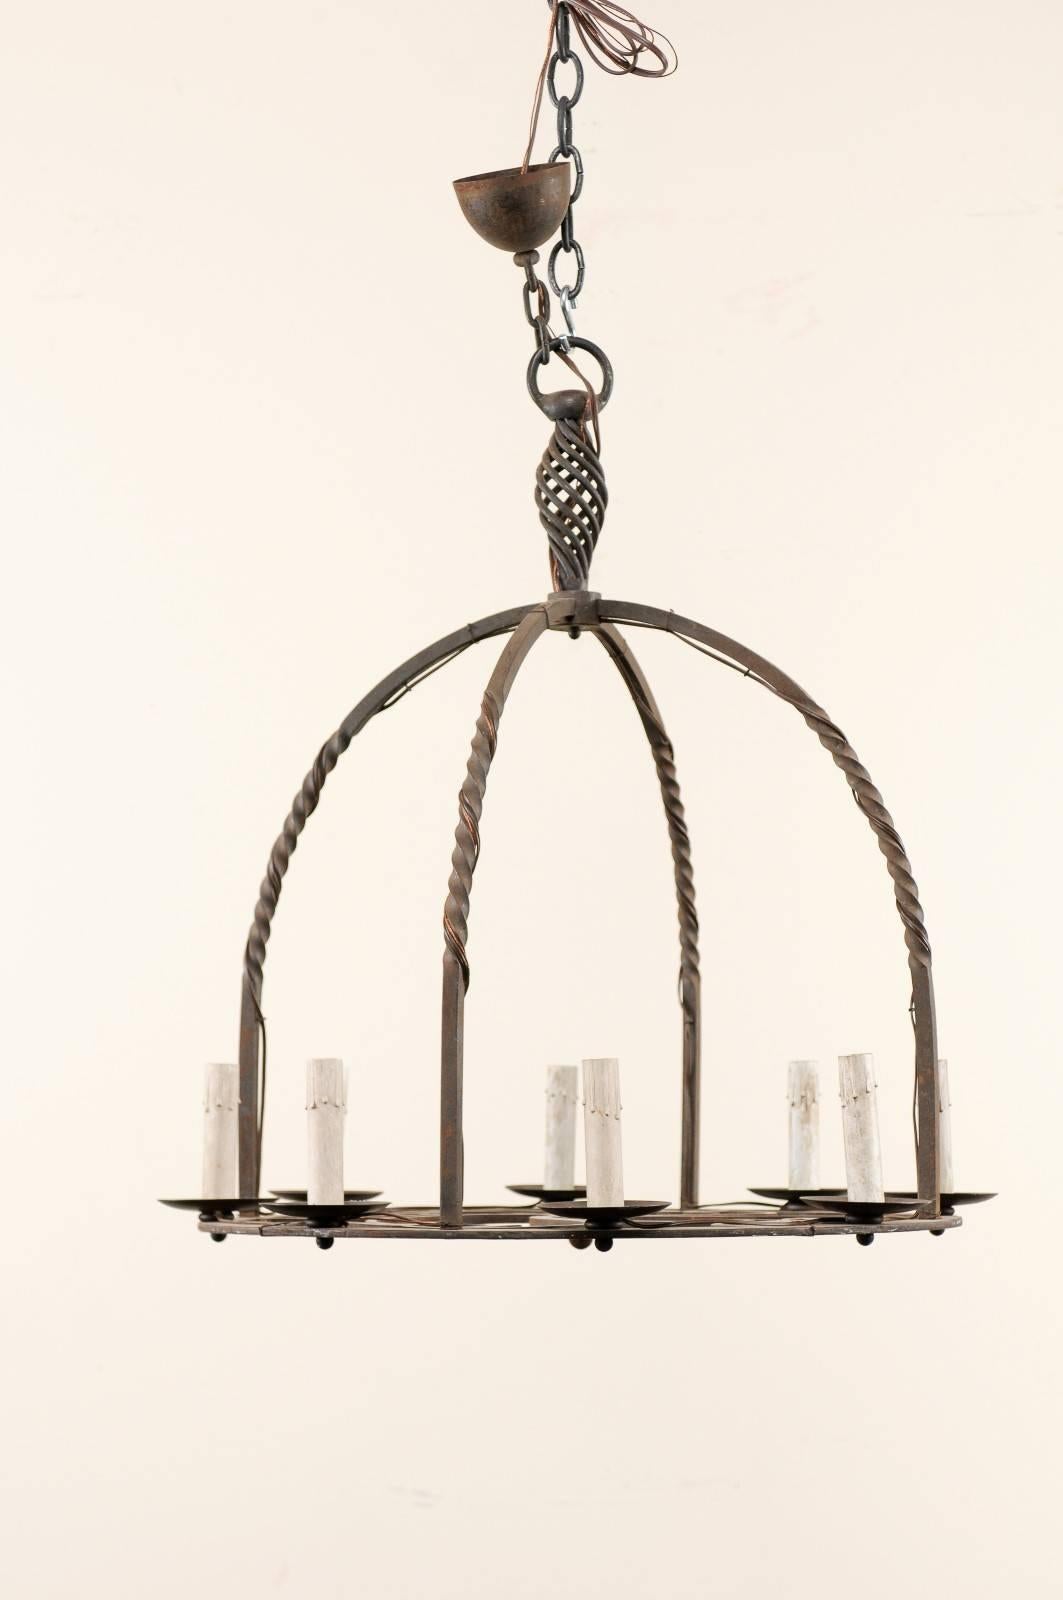 A French 19th century eight-light iron chandelier. This French forged iron chandelier features a central ring with two twisted metal pieces which criss-cross in an arching design over its base, creating a great domed-shape. The interior of the ring